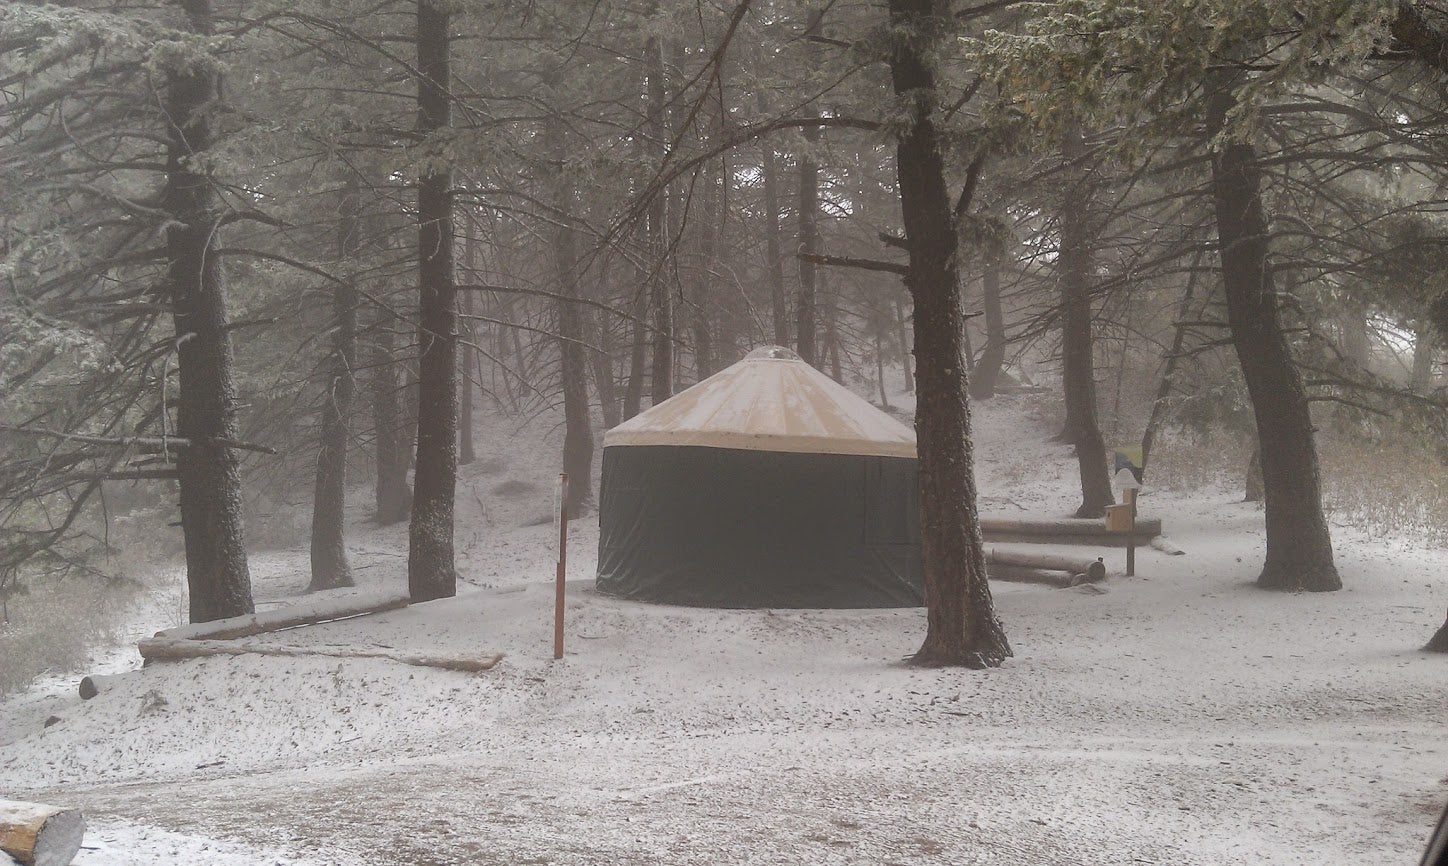 A view of the main Lucky Peak camp: a green yurt with a beige roof in the forest blanketed in a dusting of snow